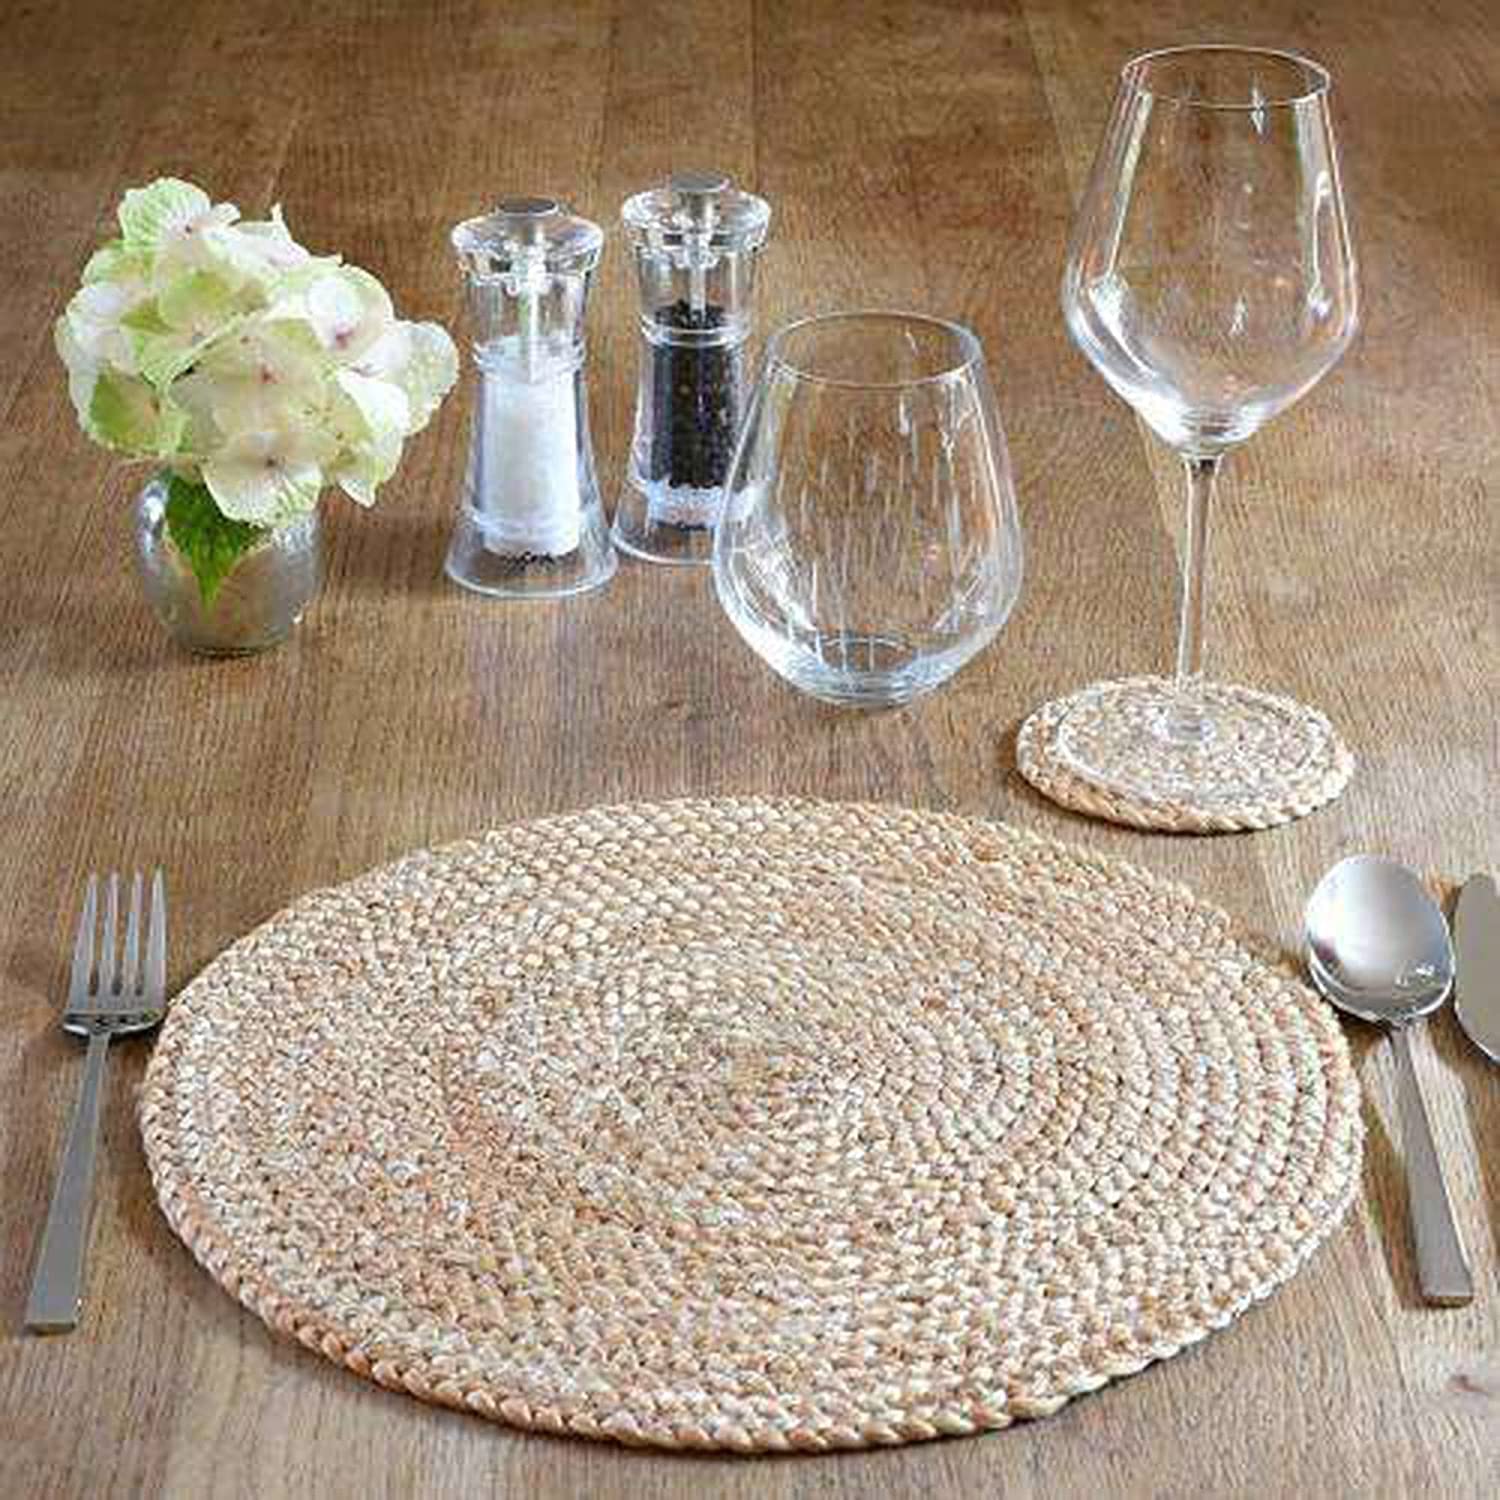 Amazon Brand - Eono 100% Jute Hand Braided Placemats Set of 4 Rustic Vintage Farmhouse Table top & Dining Table Round Placemat for Parties (35 CM/14 INCH Diameter, Natural) Set of 4